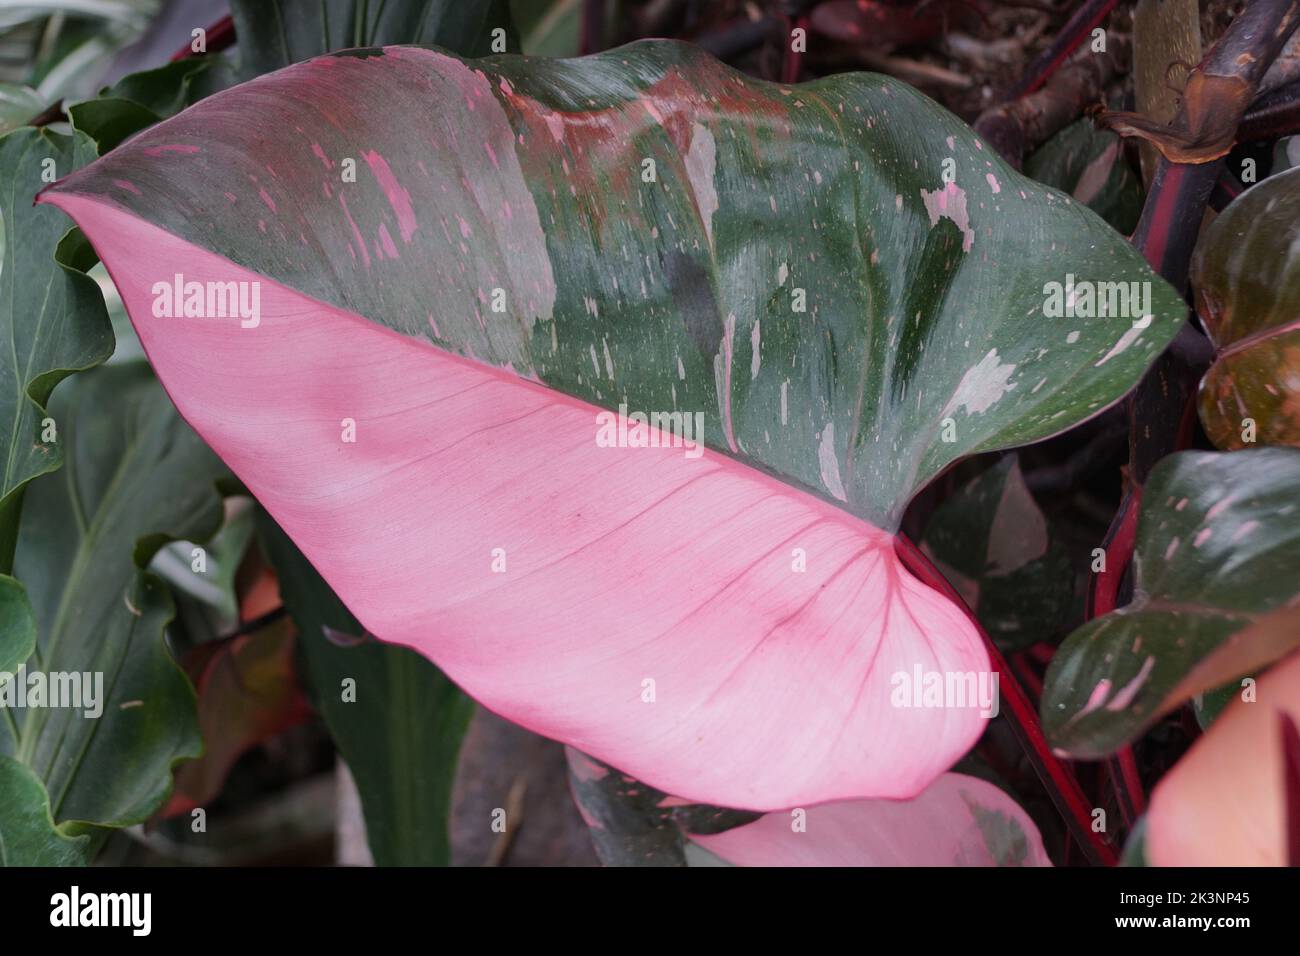 Beautiful pink and dark green half moon leaf of Philodendron Pink Princess, a rare tropical plant Stock Photo